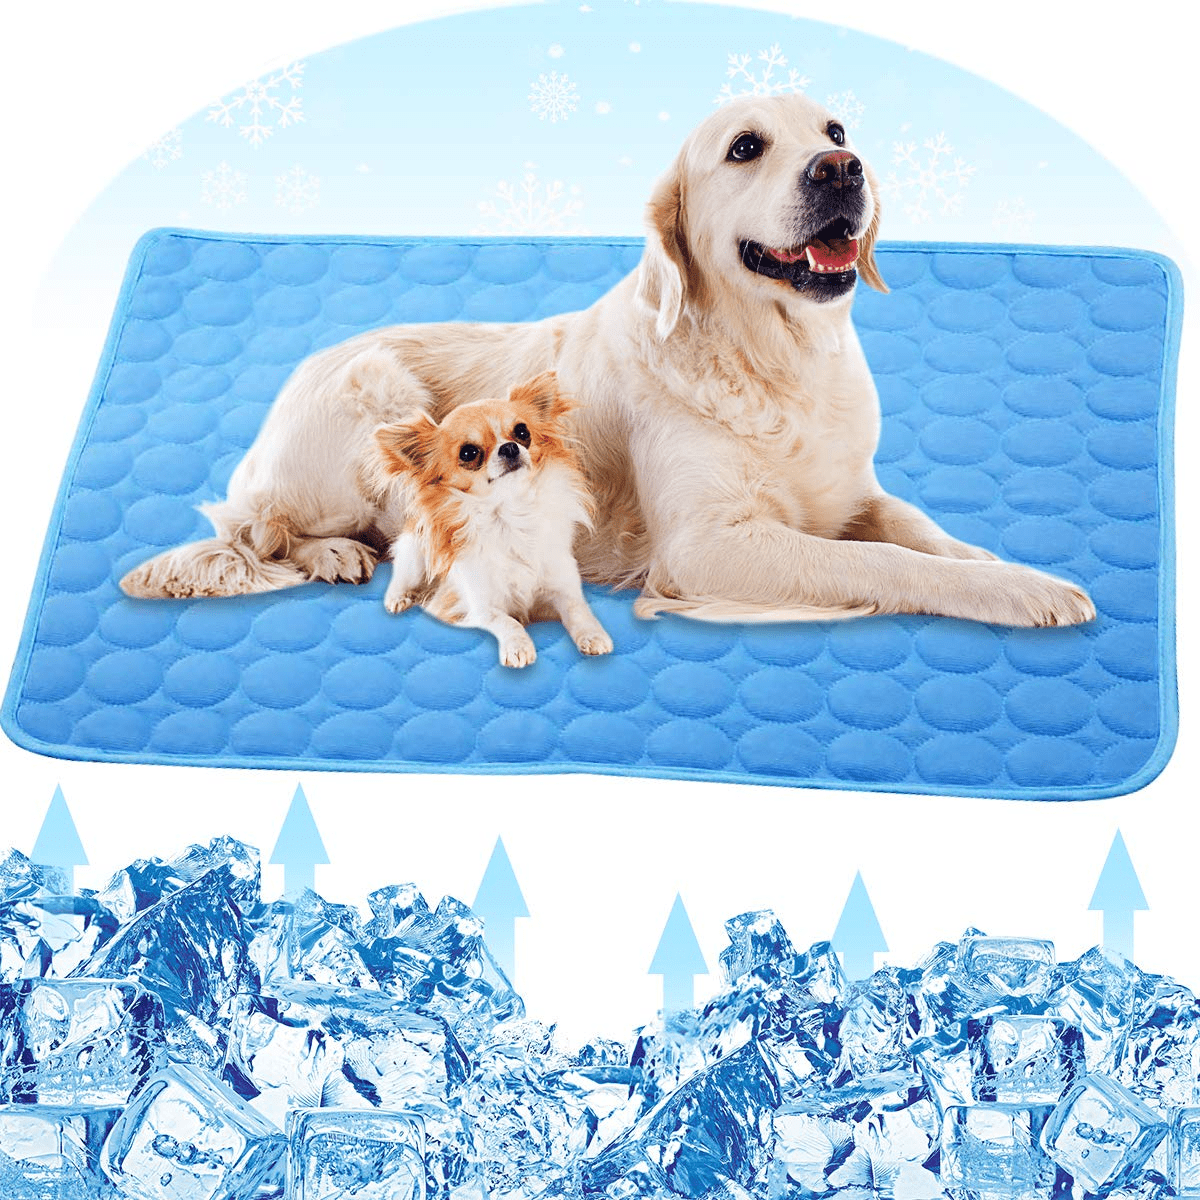 New Pet Cooling Pad Gel Mat Cooler For Dog Crate Bed Kennel S M L XL Blue Home